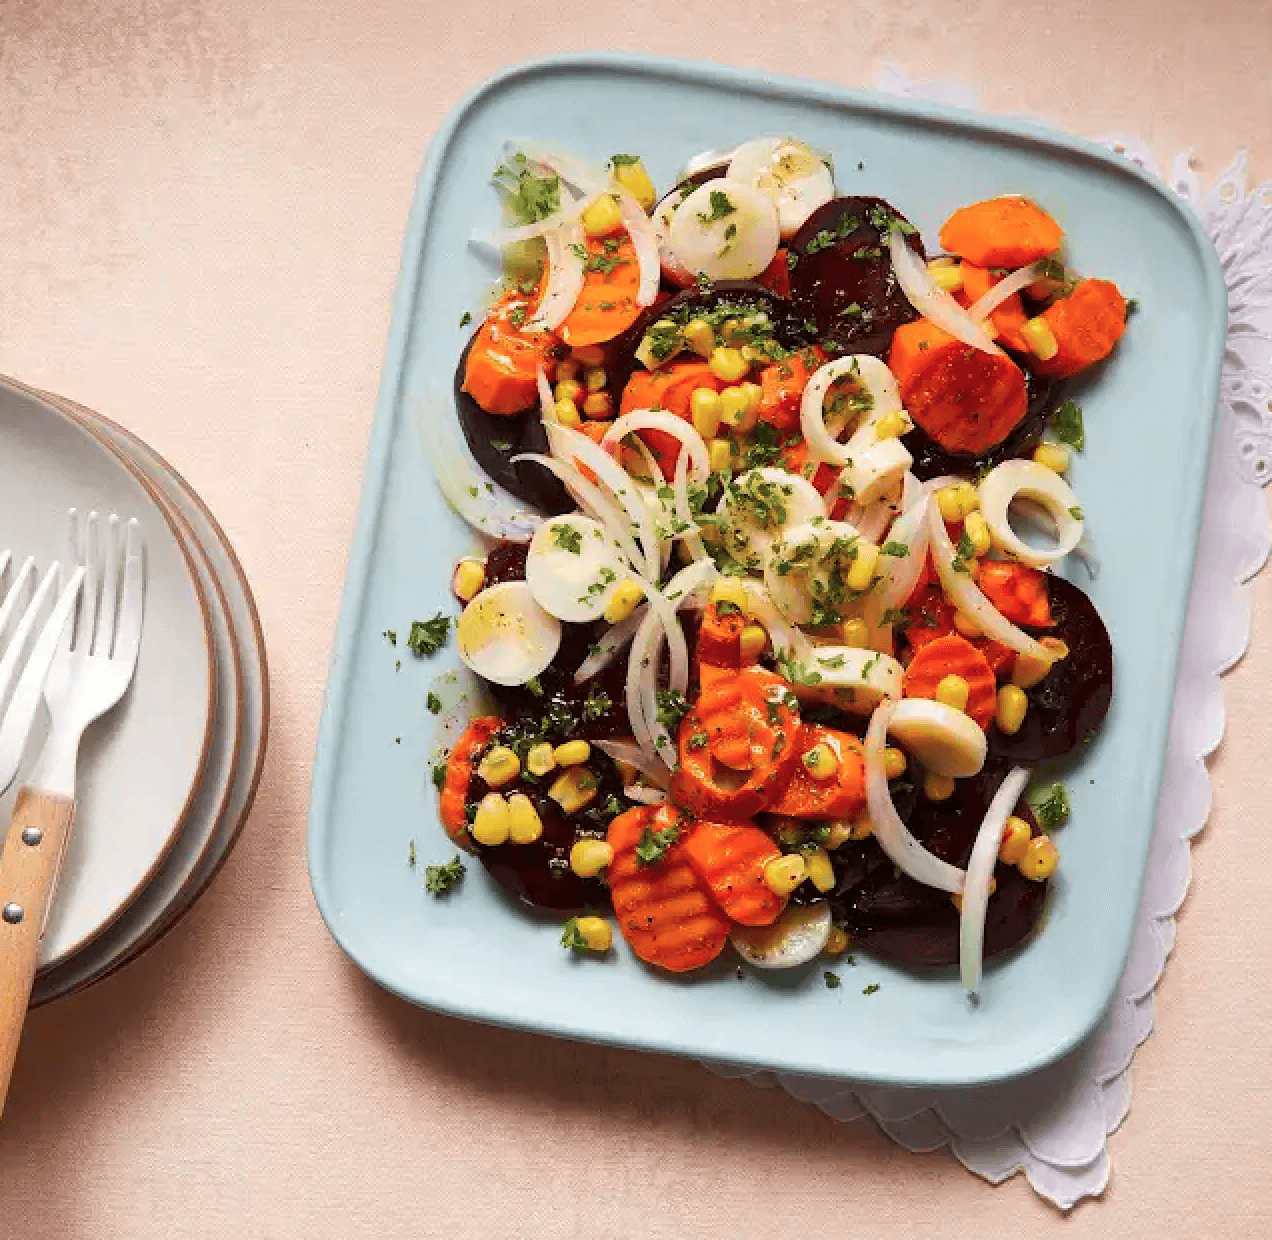 Colombian marinated carrot and beet salad